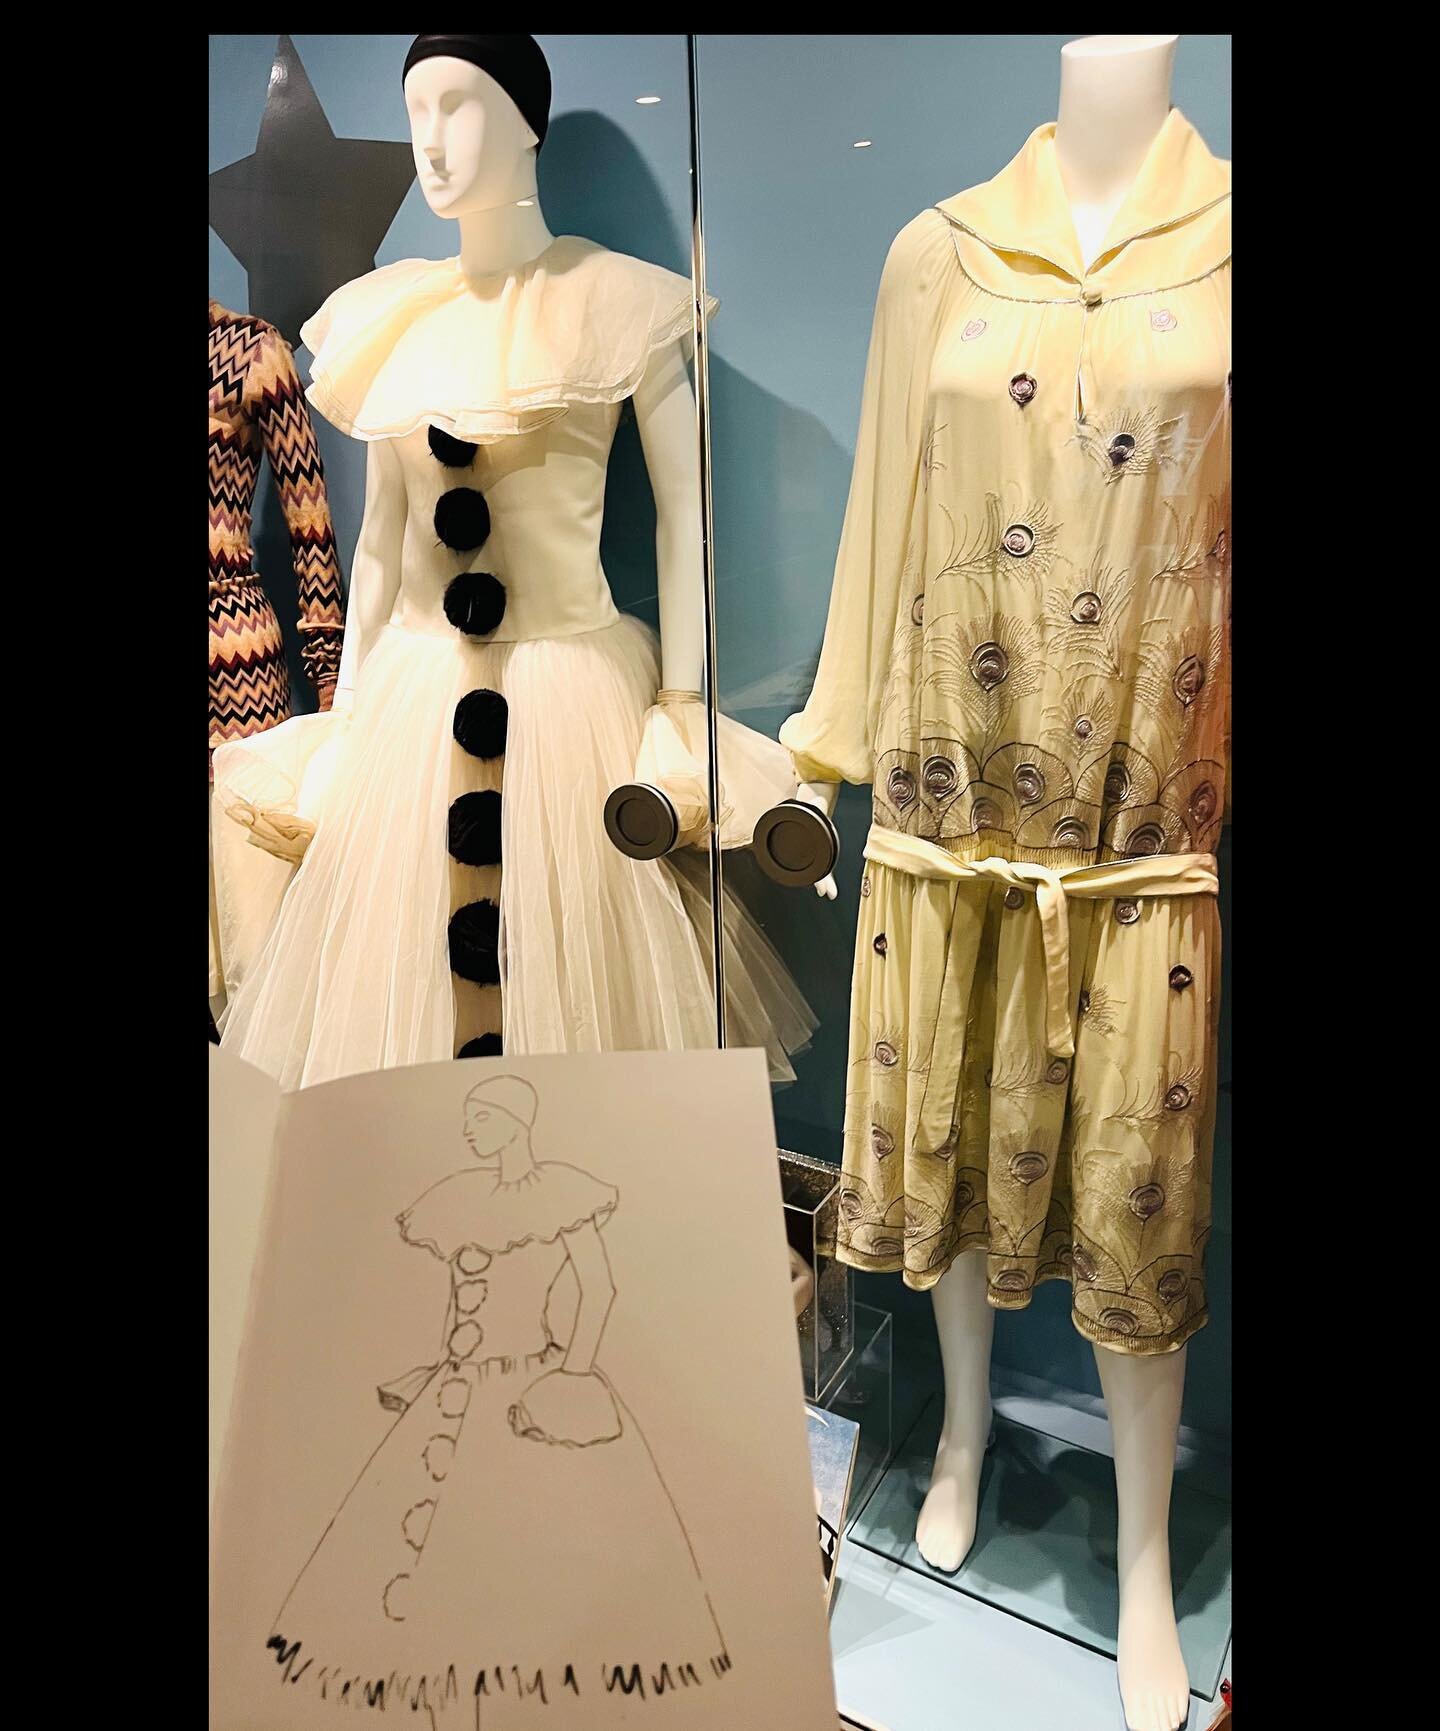 A drawing in progress today of the Pierrot costume worn by Twiggy in The Boyfriend 😍
What an iconic collection on show at the Biba exhibition &hearts;️
.
.
#fashionillustration #illustrator #illo #fashionartist #drawingfashion #dailydrawing #sketchb